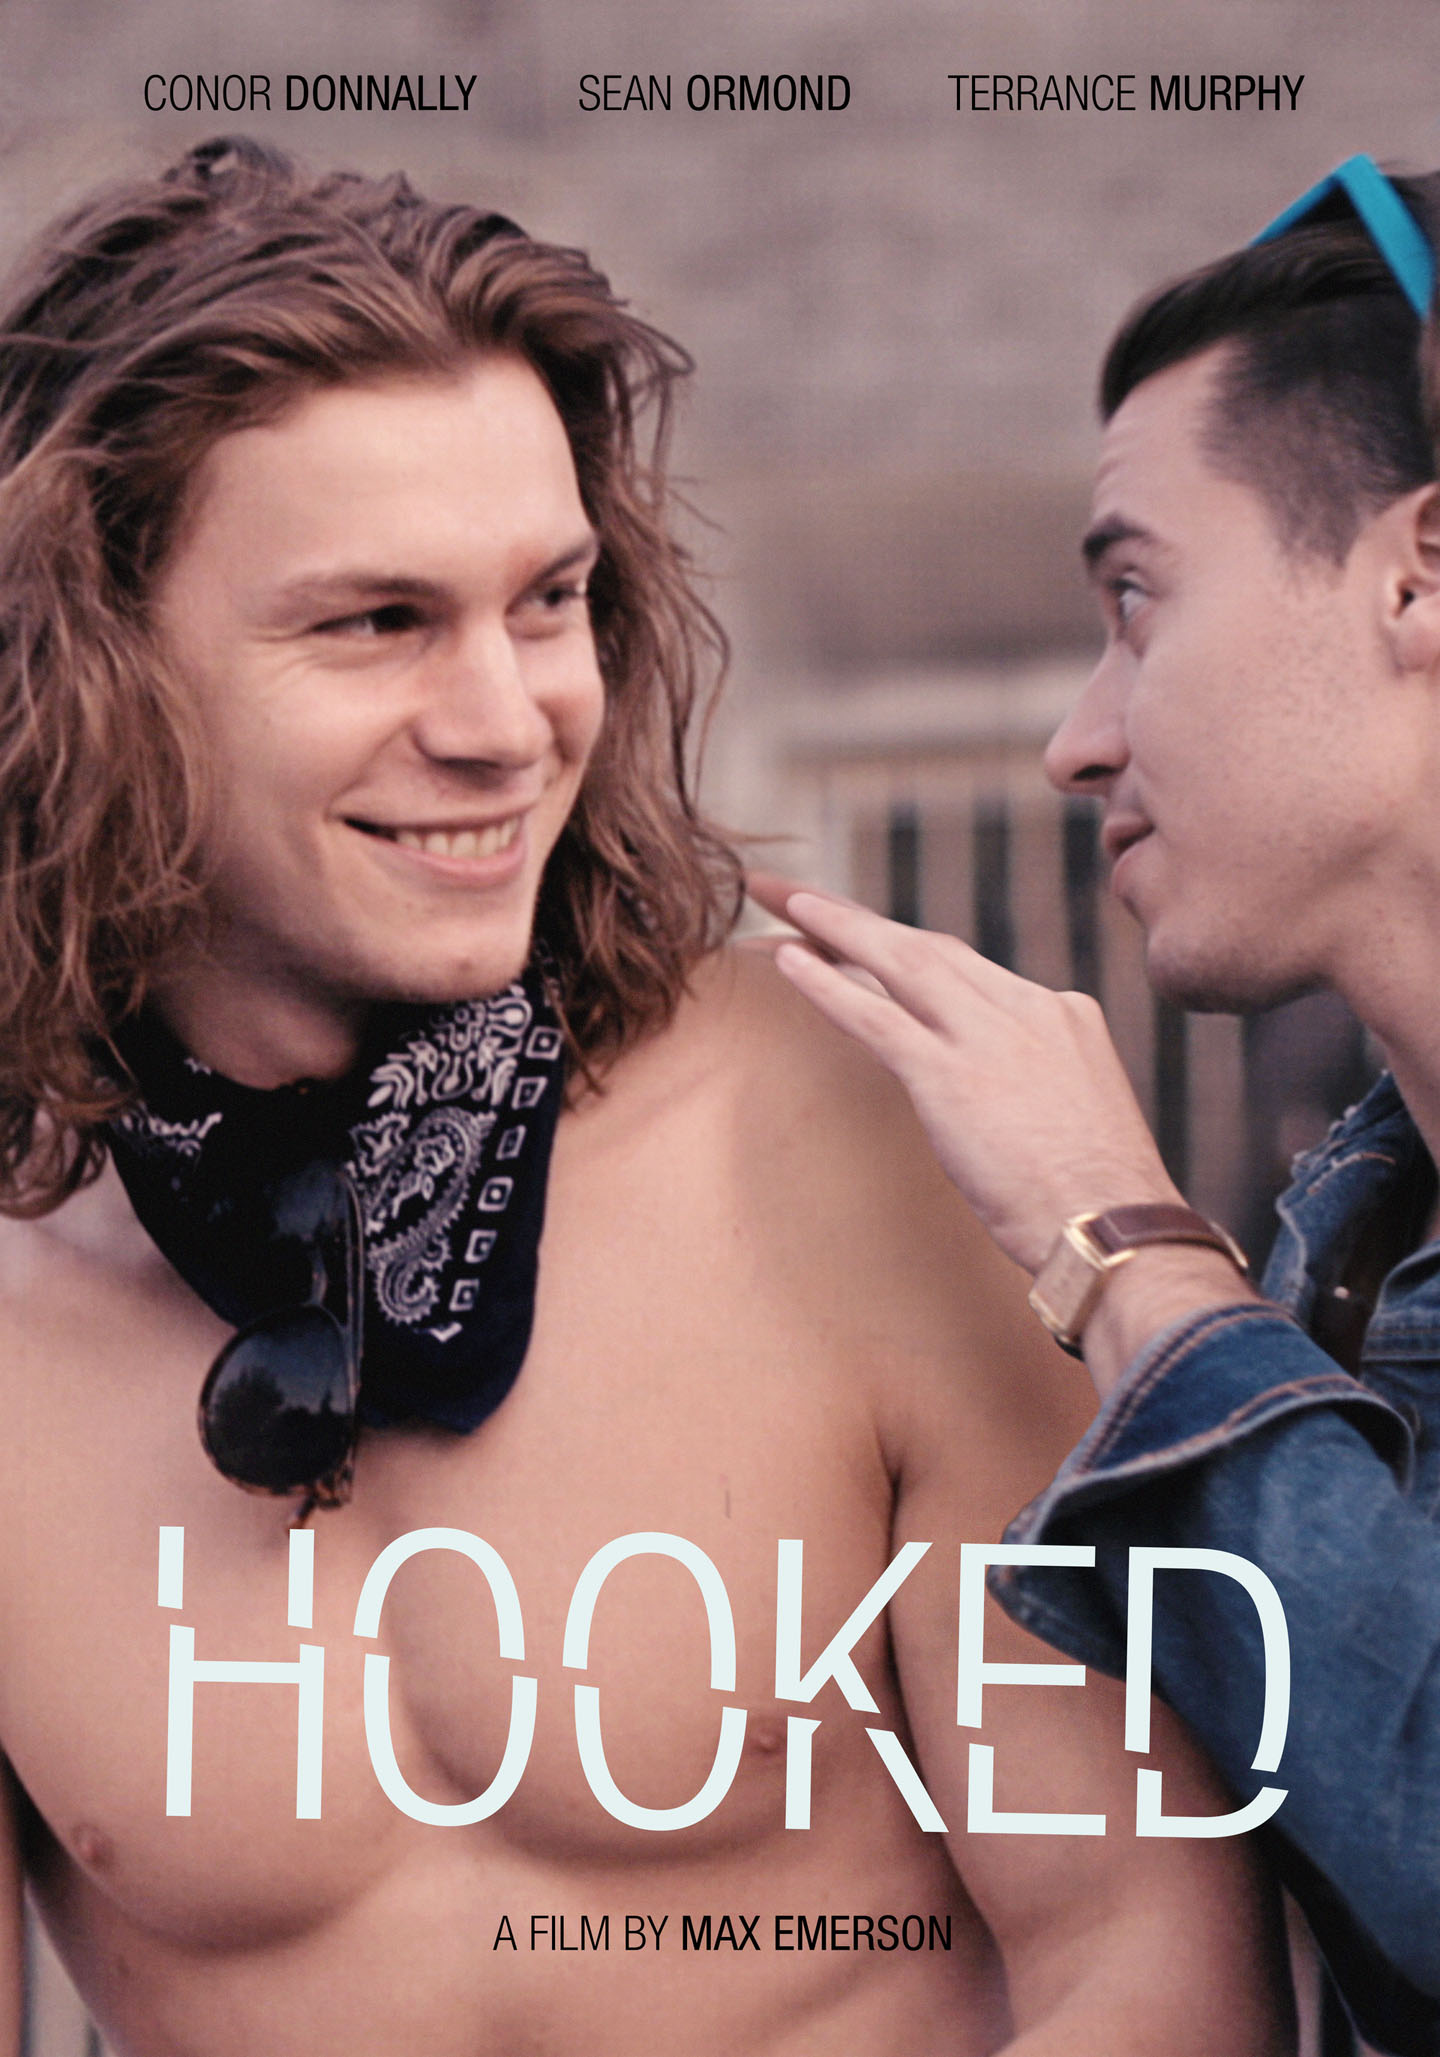 With 'Hooked' emerging filmmaker Max Emerson focuses on the dangerous lives of homeless LGBTQ teens on the streets of New York.